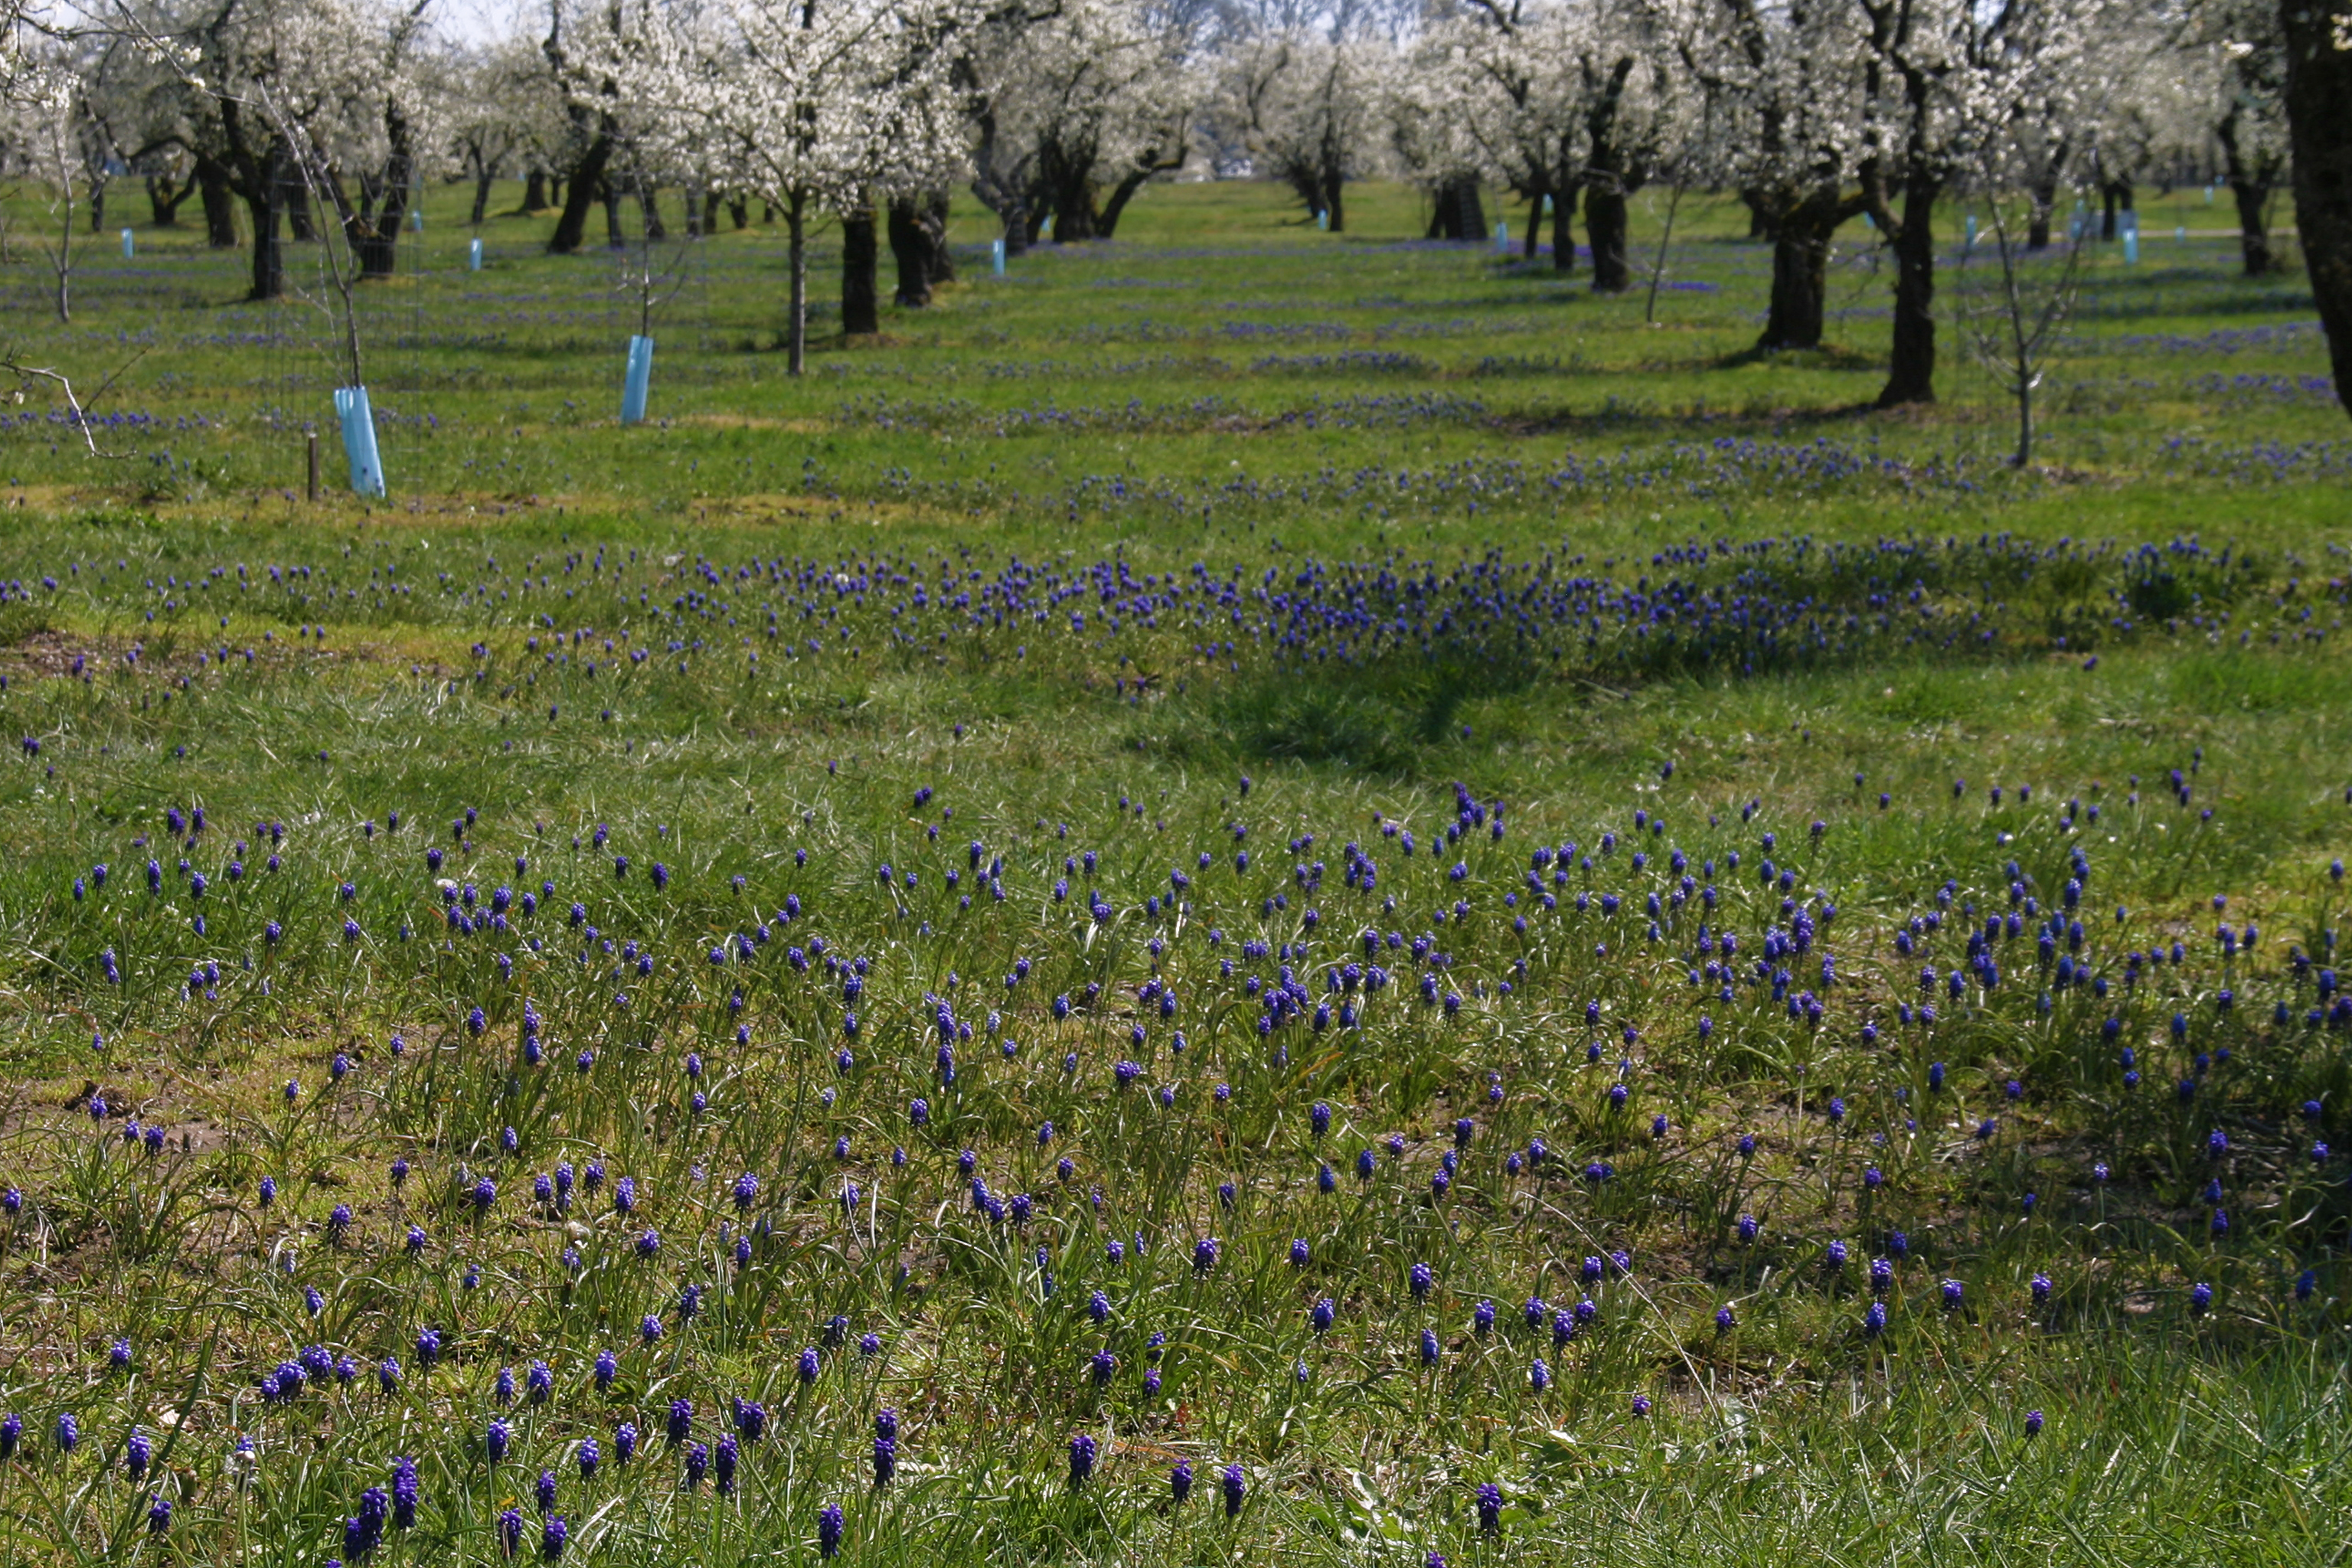 Spring flowers in the willamette valley, oregon photo